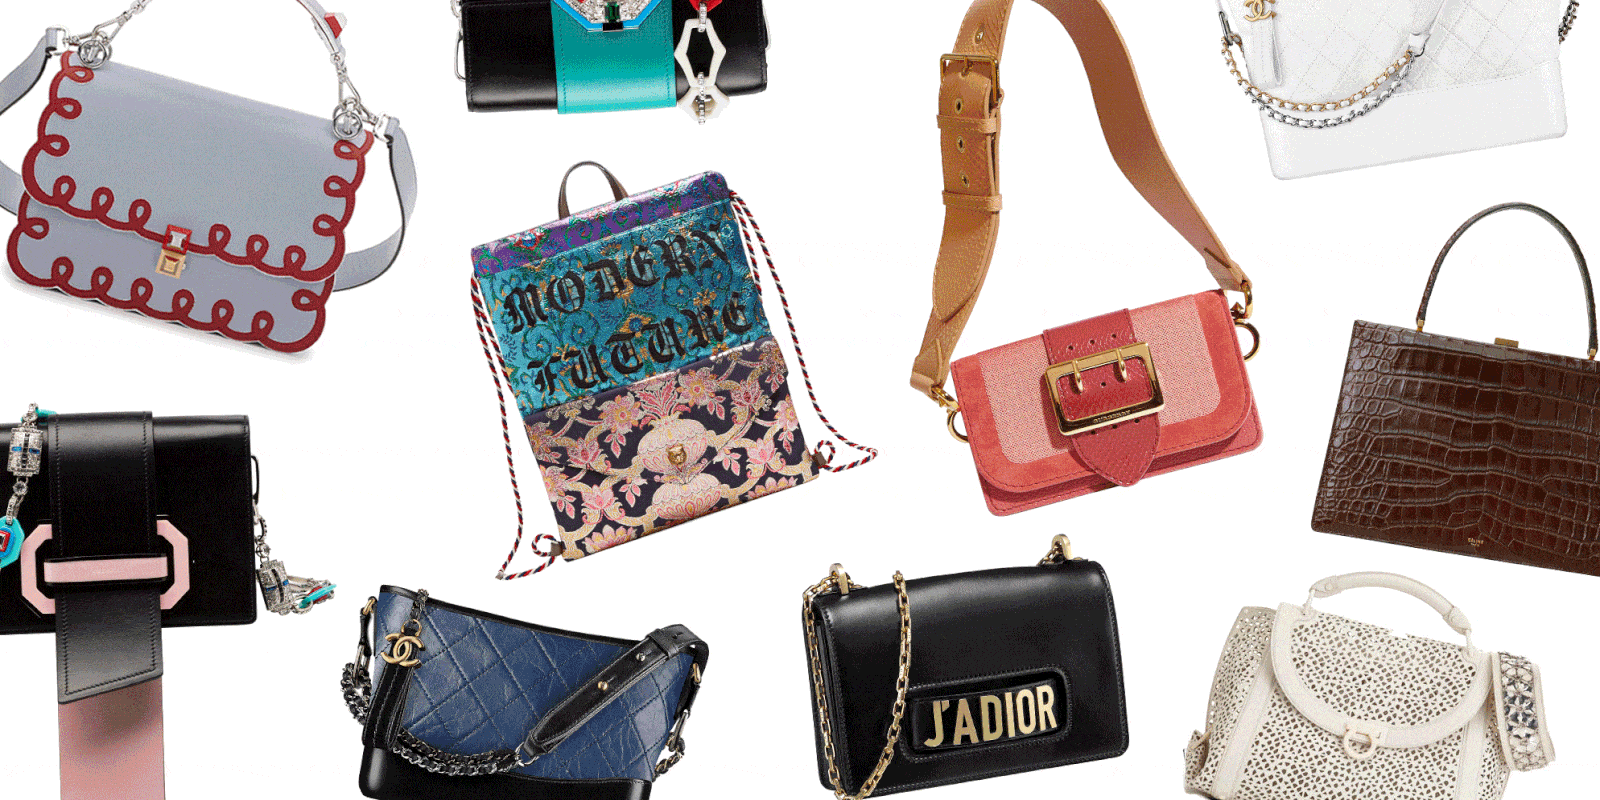 Pin on designer bags obsession